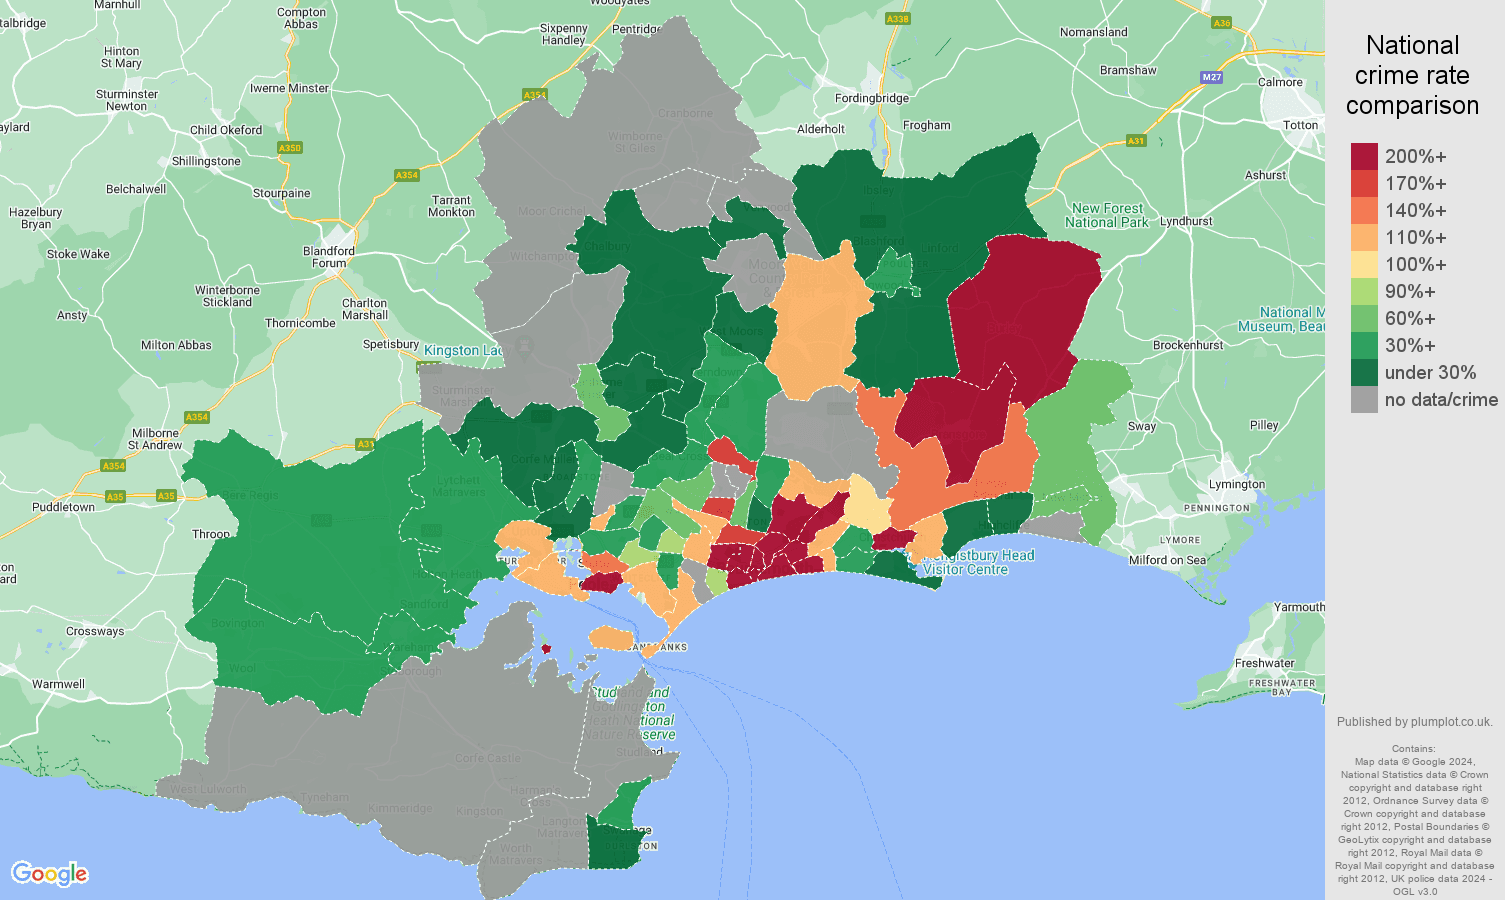 Bournemouth bicycle theft crime rate comparison map